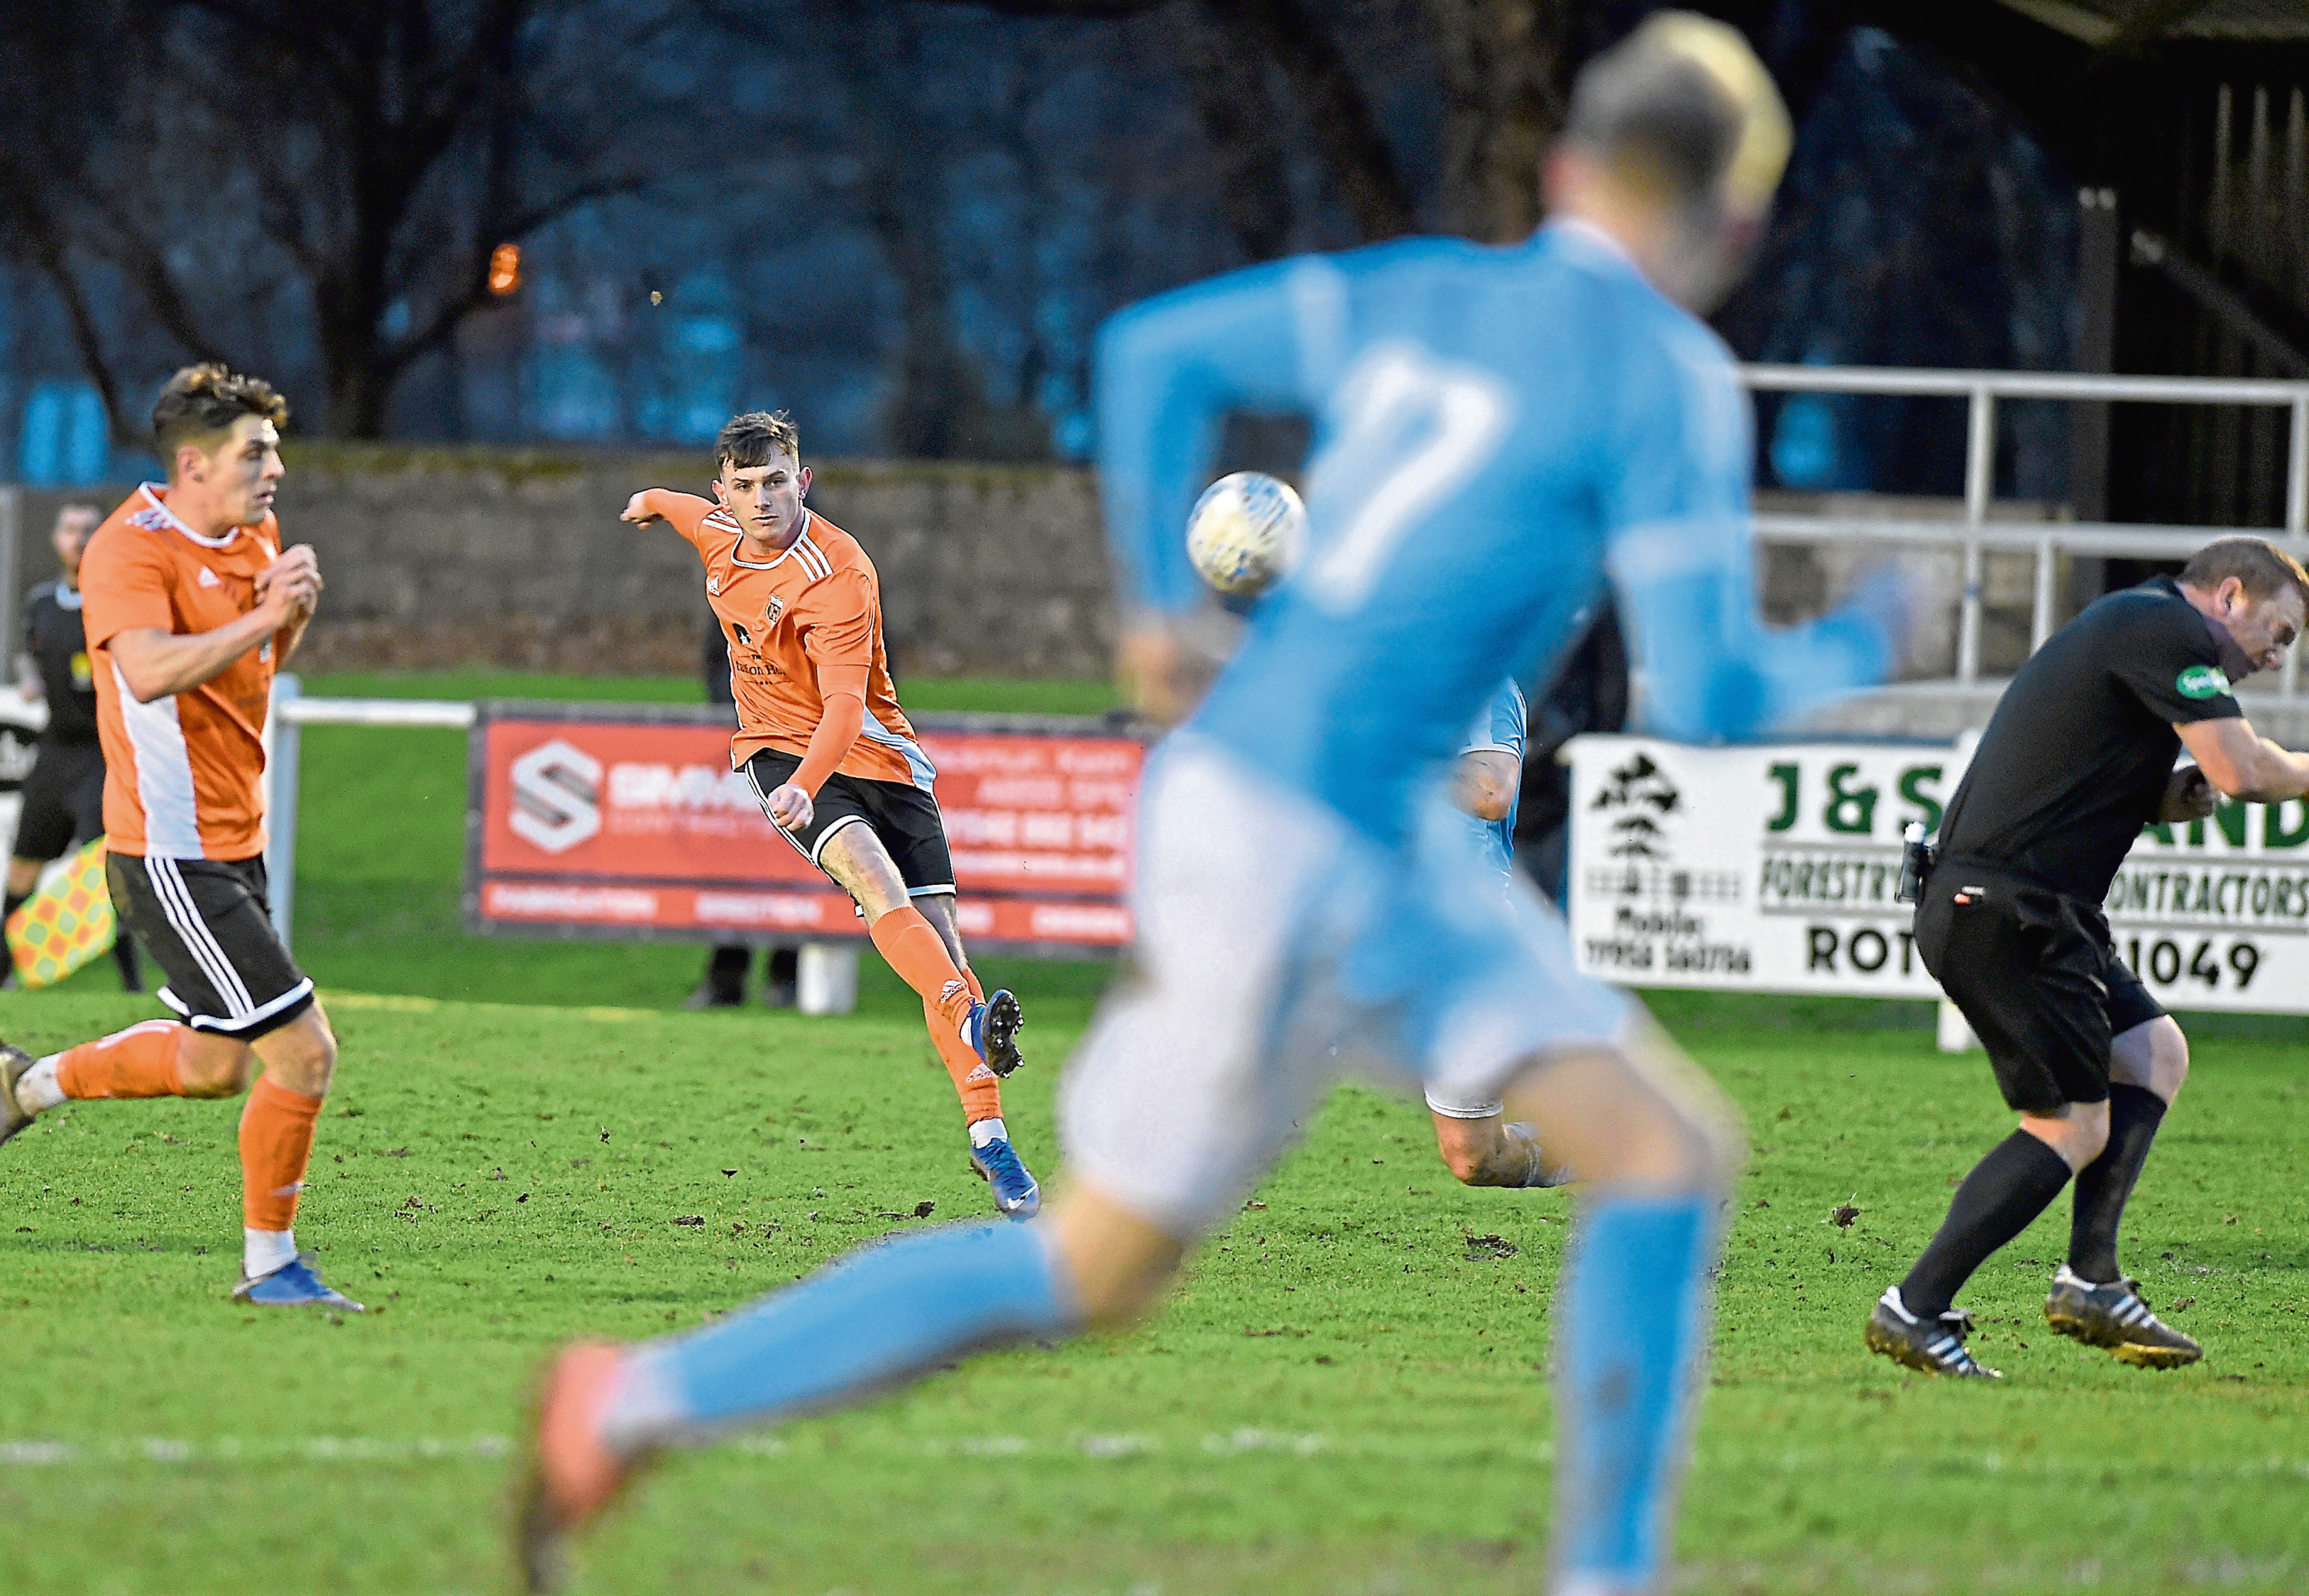 Referee Alan Proctor ducks as Alisdair Sutherland of Rothes scores his teams opening goal from well outside the box.